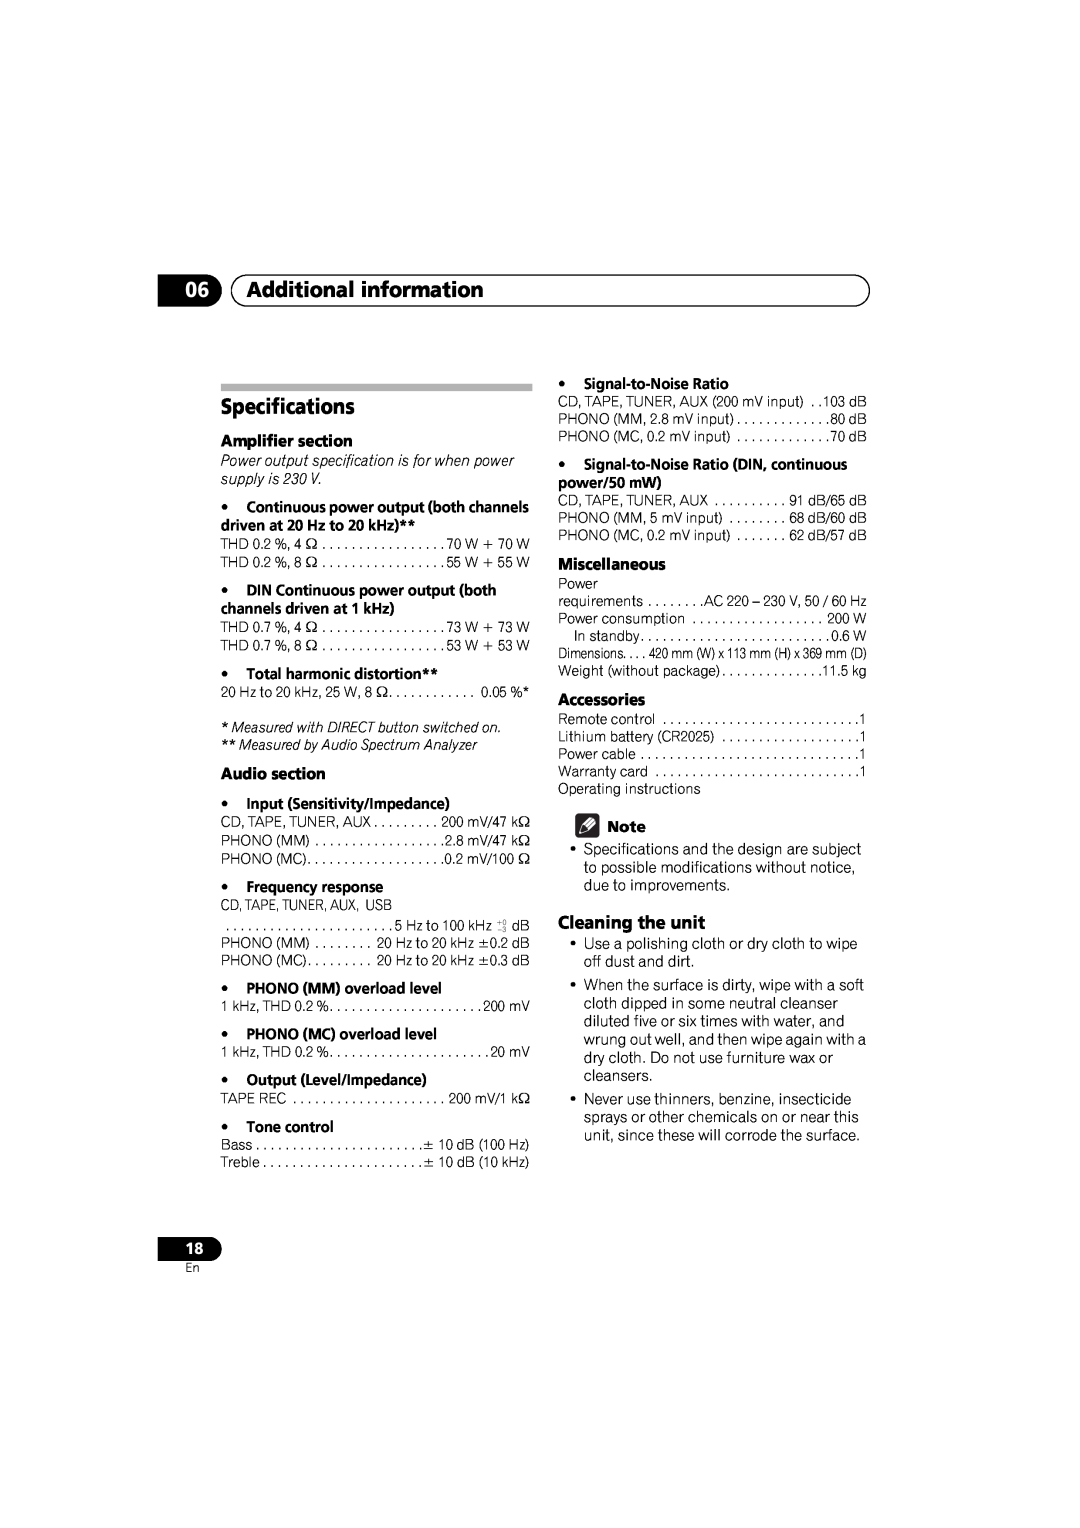 Pioneer A-A9-J 06Additional information Specifications, Cleaning the unit, Amplifier section, Audio section, Miscellaneous 